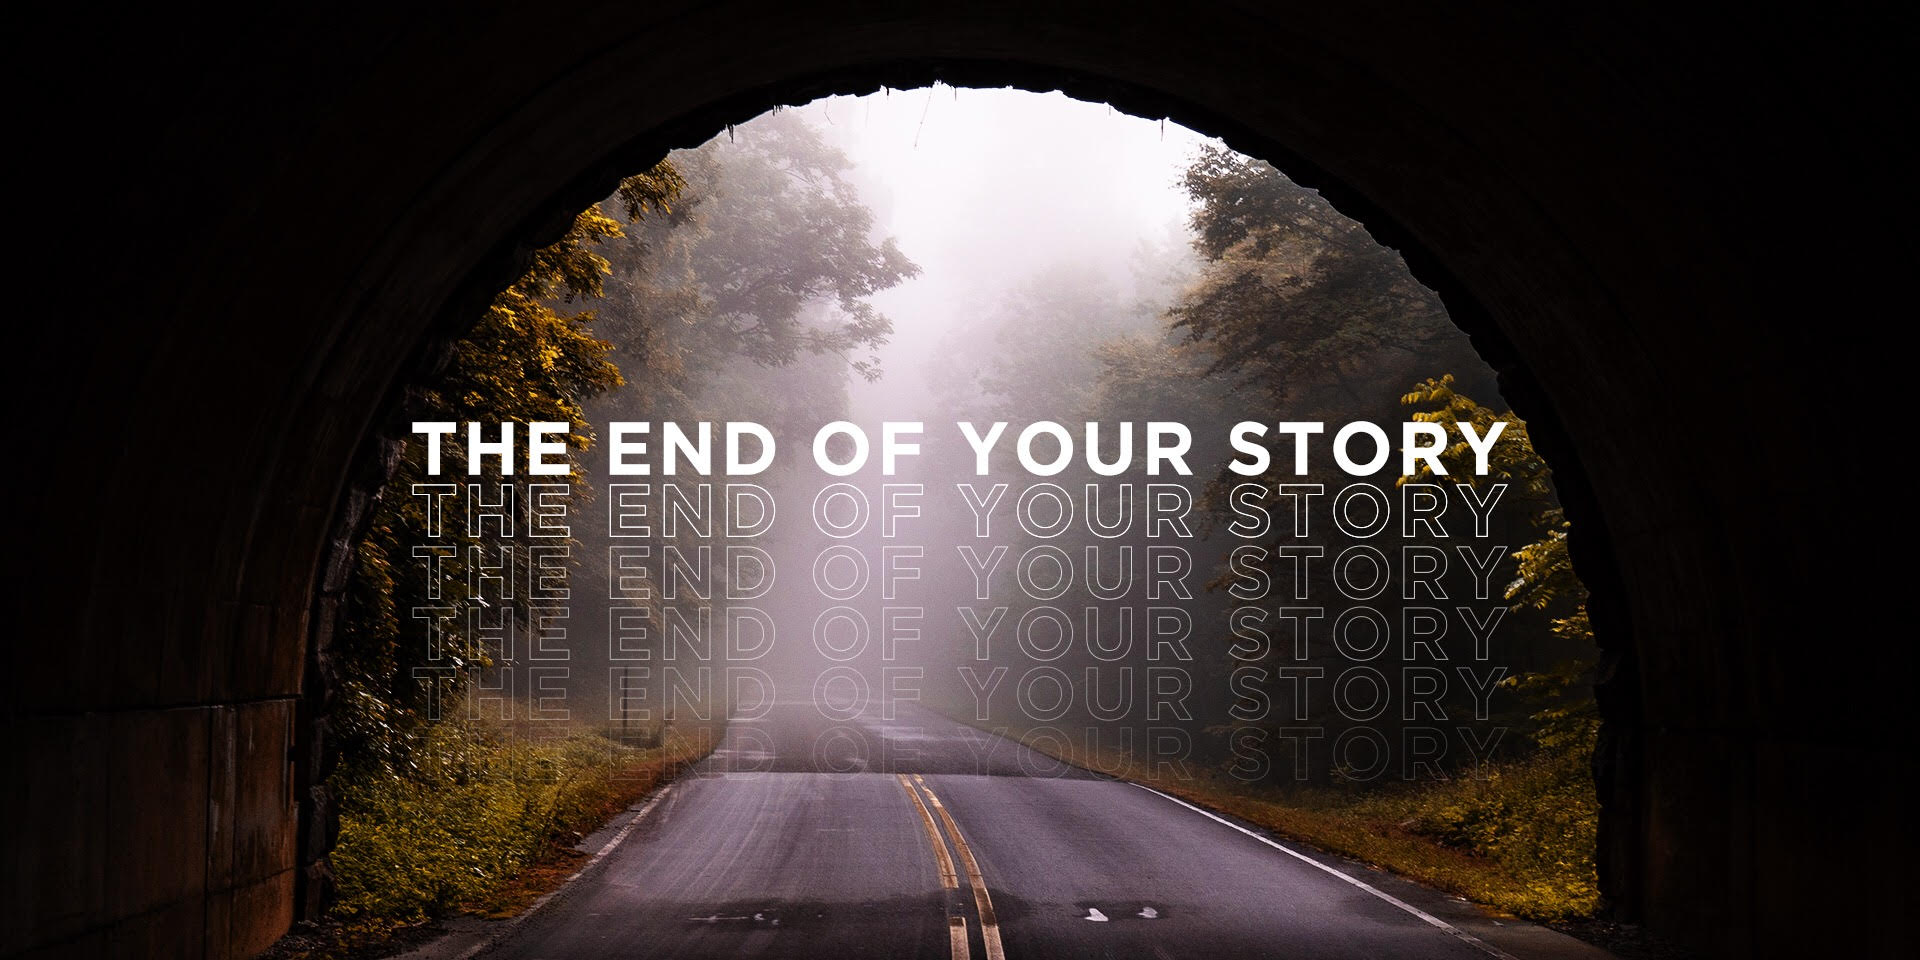 THE END OF YOUR STORY